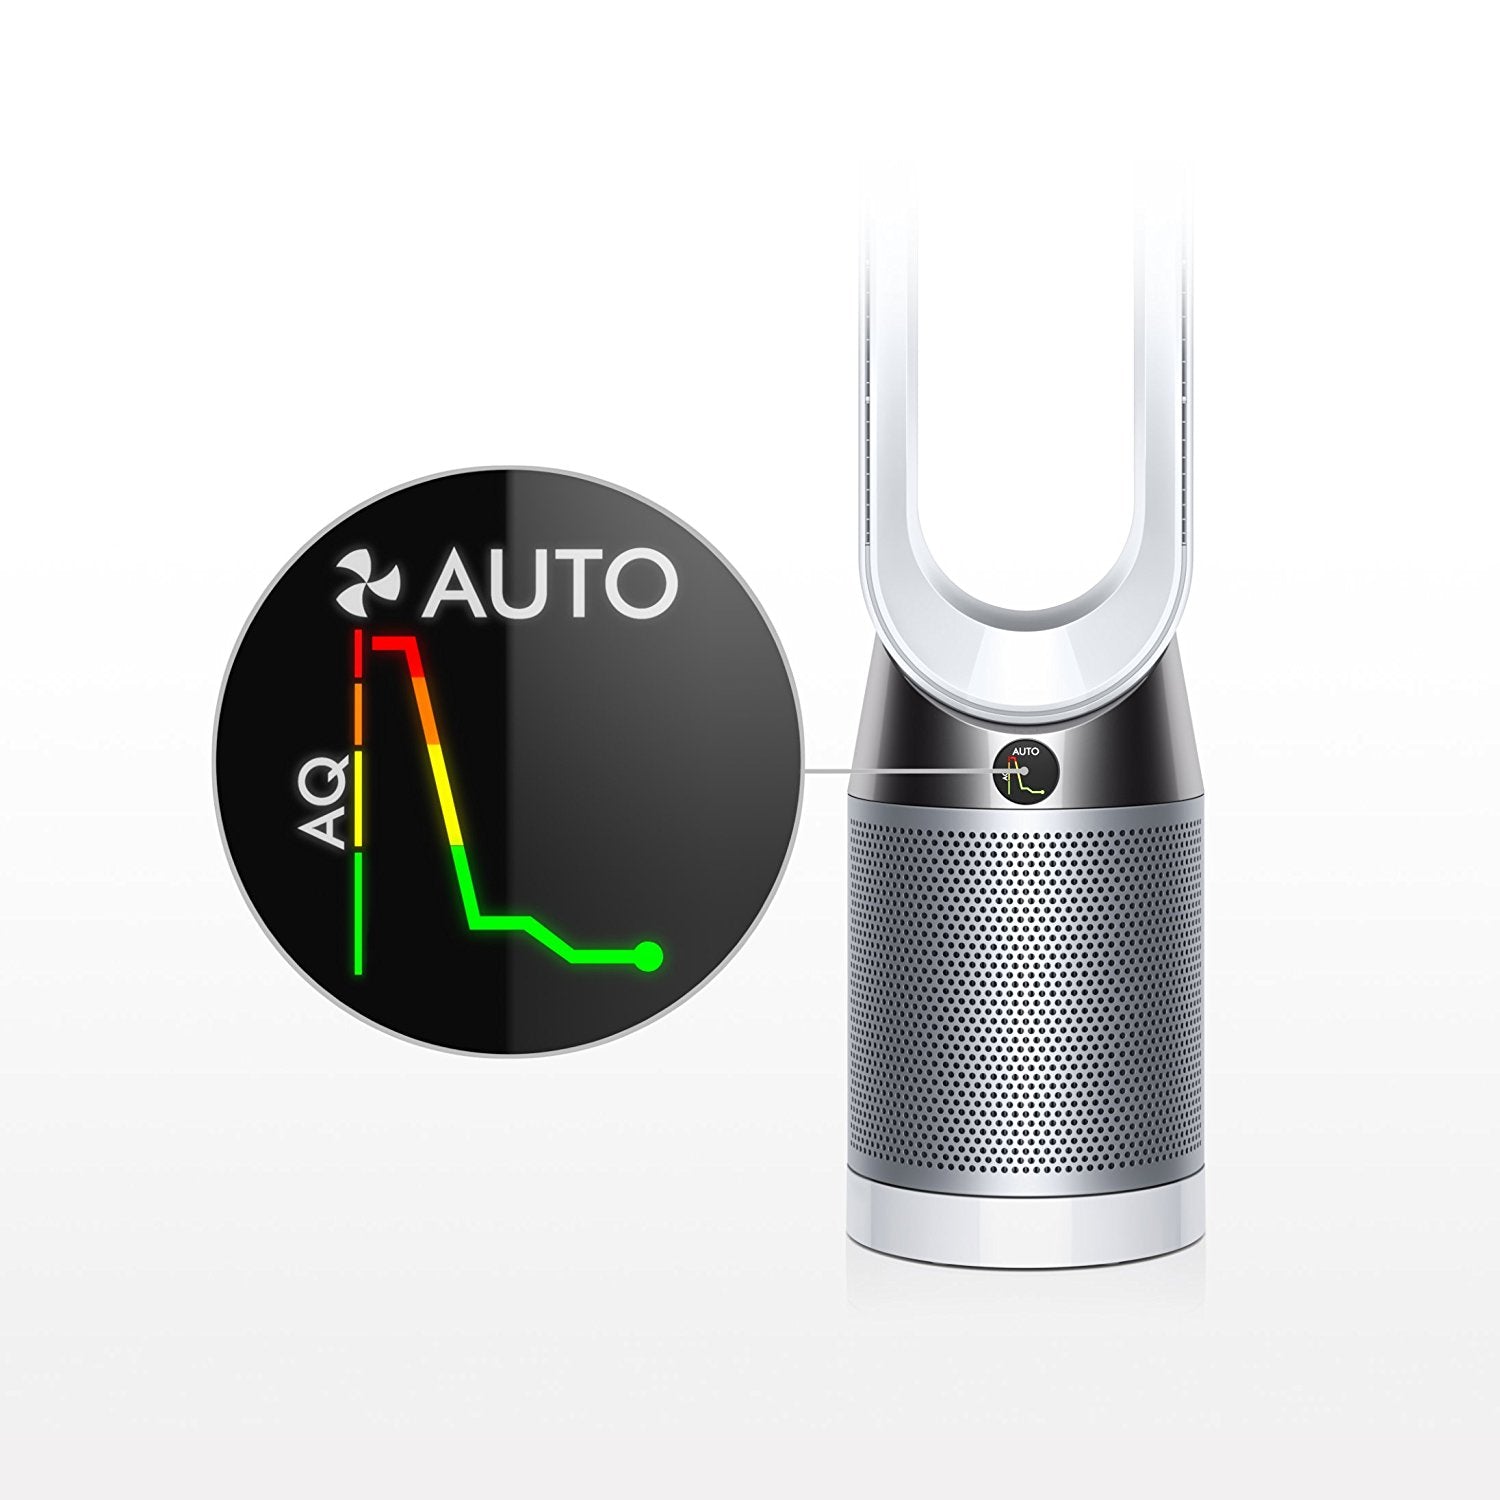 Dyson Pure Cool purifying tower fan TP04. Automatically detects and reports air quality levels in real time on PM 2.5, PM 10, VOC and NO2. 